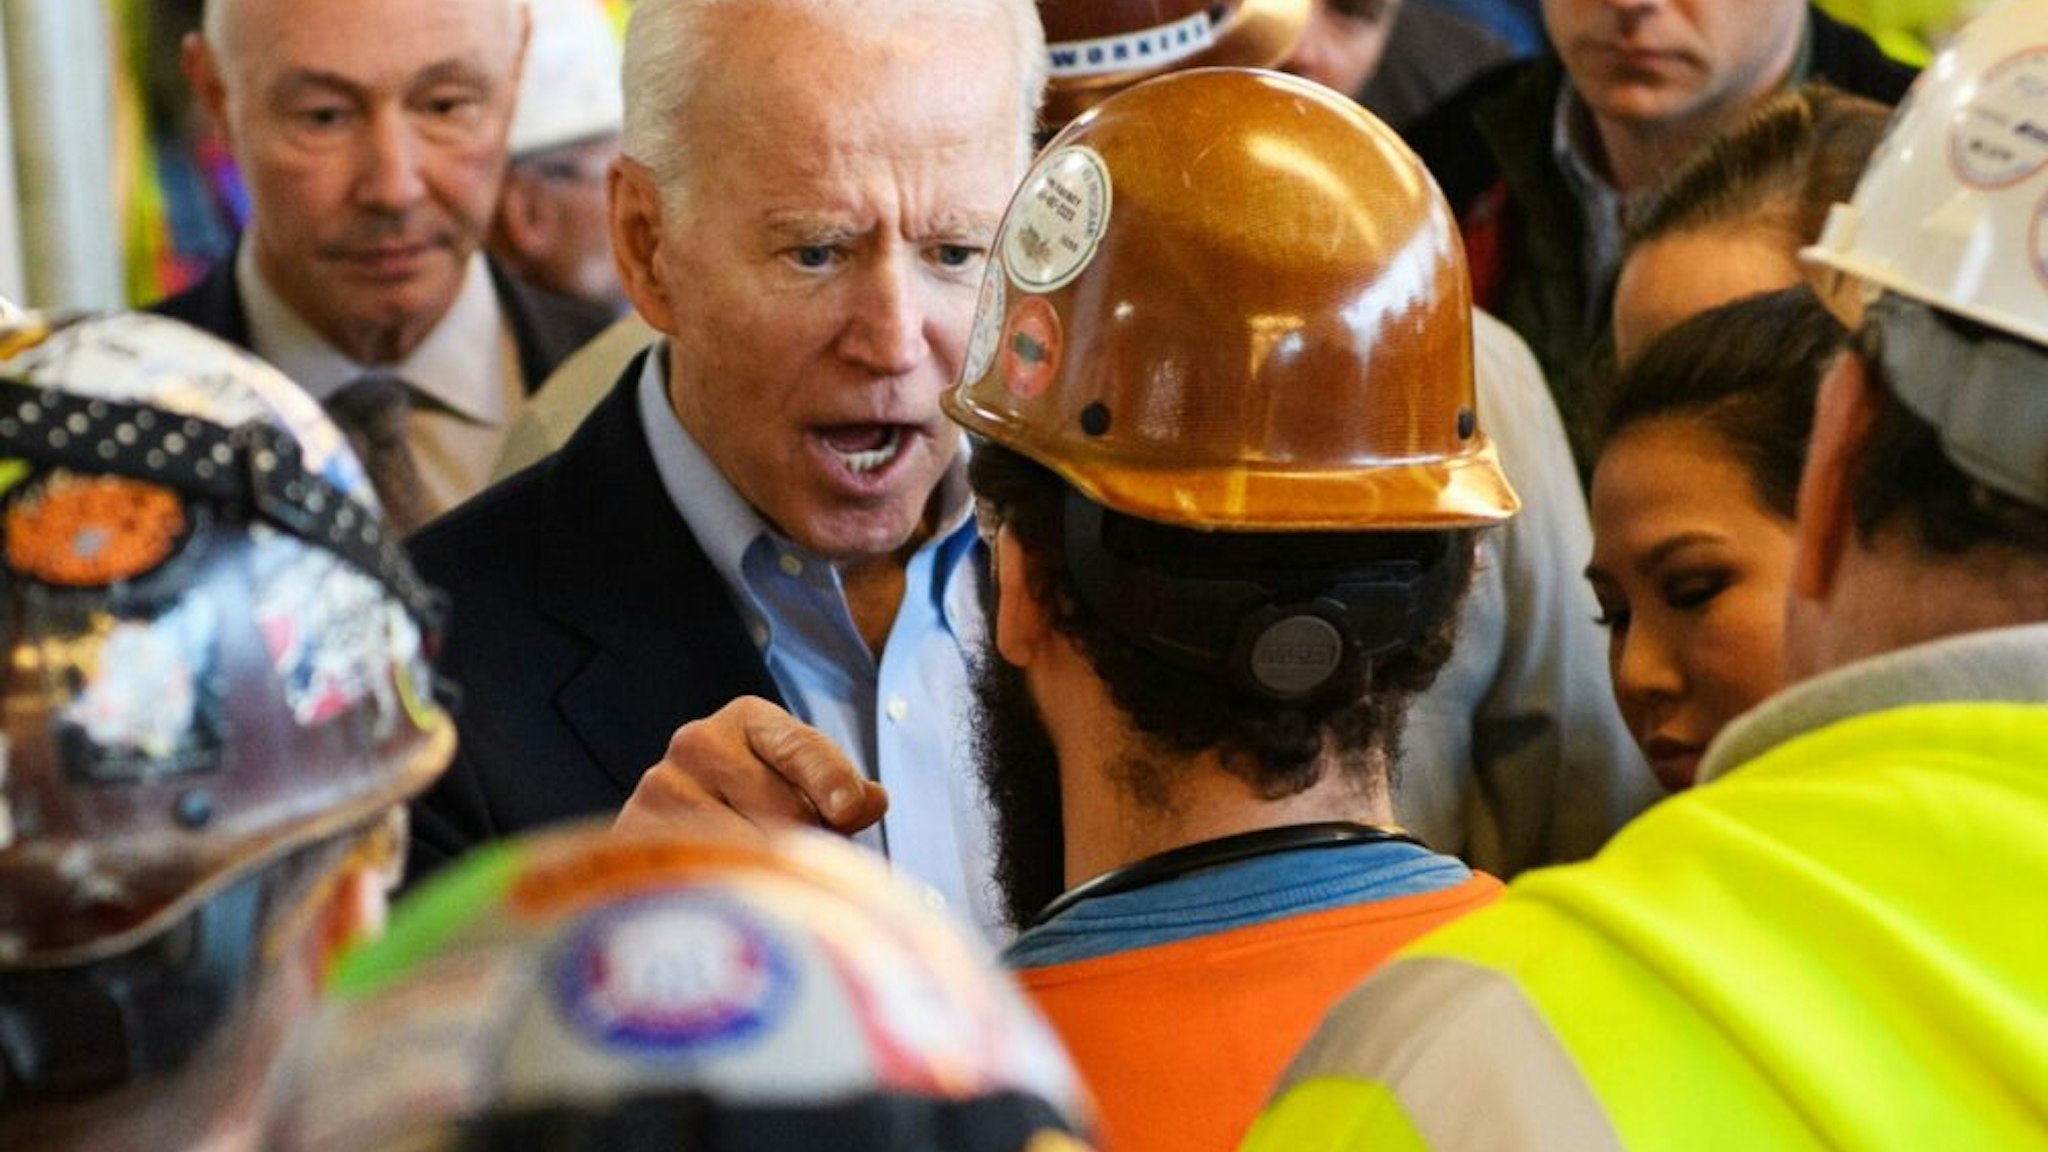 Democratic presidential candidate Joe Biden has heated exchange meets workers and discusses gun rights as he tours the Fiat Chrysler plant in Detroit, Michigan on March 10, 2020. - Biden opened primary day meeting workers at an under-construction automobile plant in Detroit, where he received cheers but also was confronted by one worker. In an exchange avidly shared online by Trump supporters, the worker, wearing a construction helmet and reflective vest, accused Biden of seeking to weaken the constitutional right to own firearms. "You're full of shit," Biden shot back. "I support the Second Amendment." When the worker pressed the issue, Biden, visibly agitated and with a raised voice, said "I'm not taking your gun away," adding, "Gimme a break, man." (Photo by MANDEL NGAN / AFP)